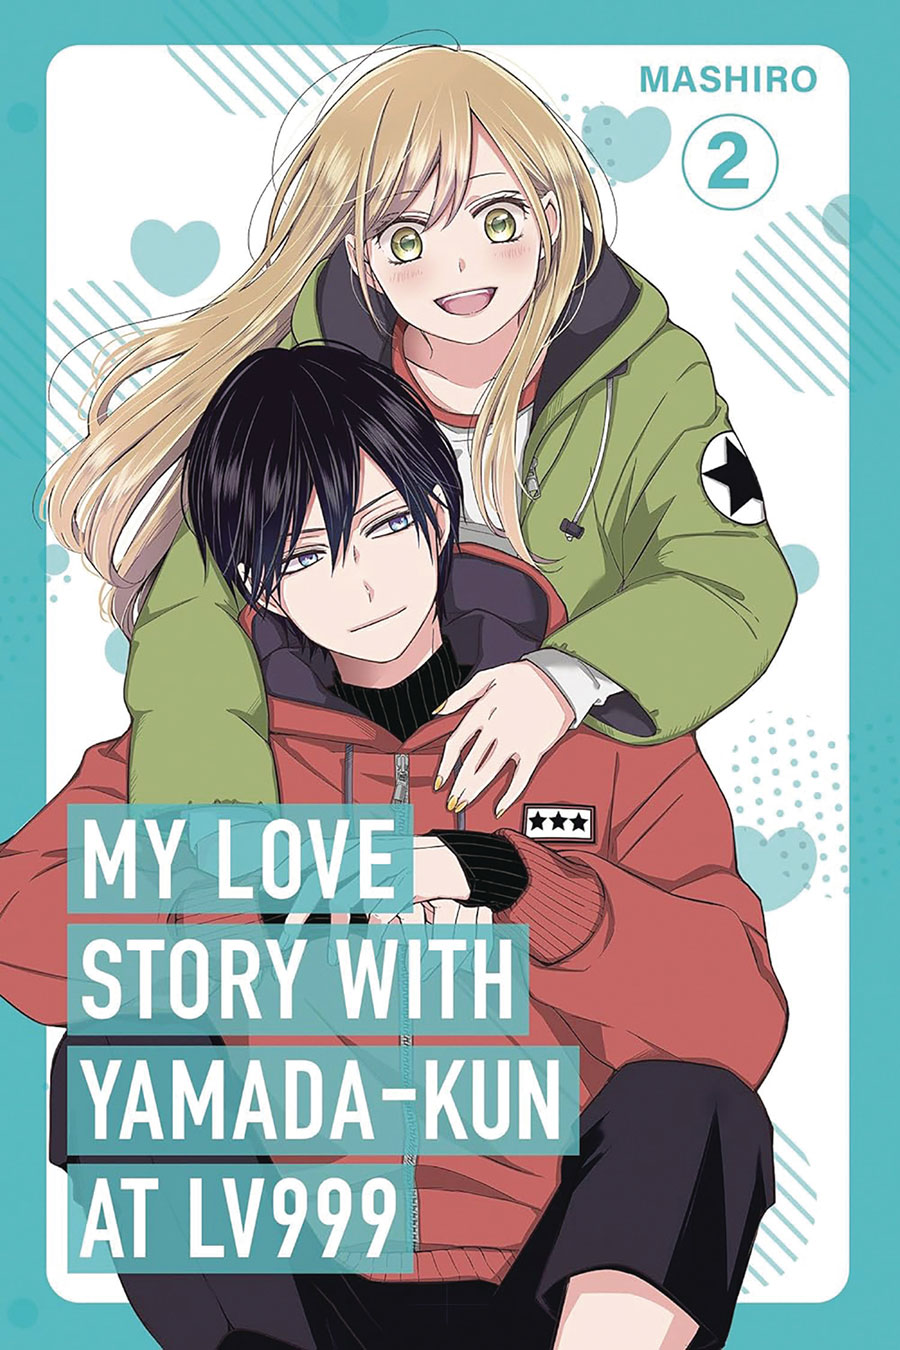 My Love Story With Yamada-Kun At LV999 Vol 2 GN